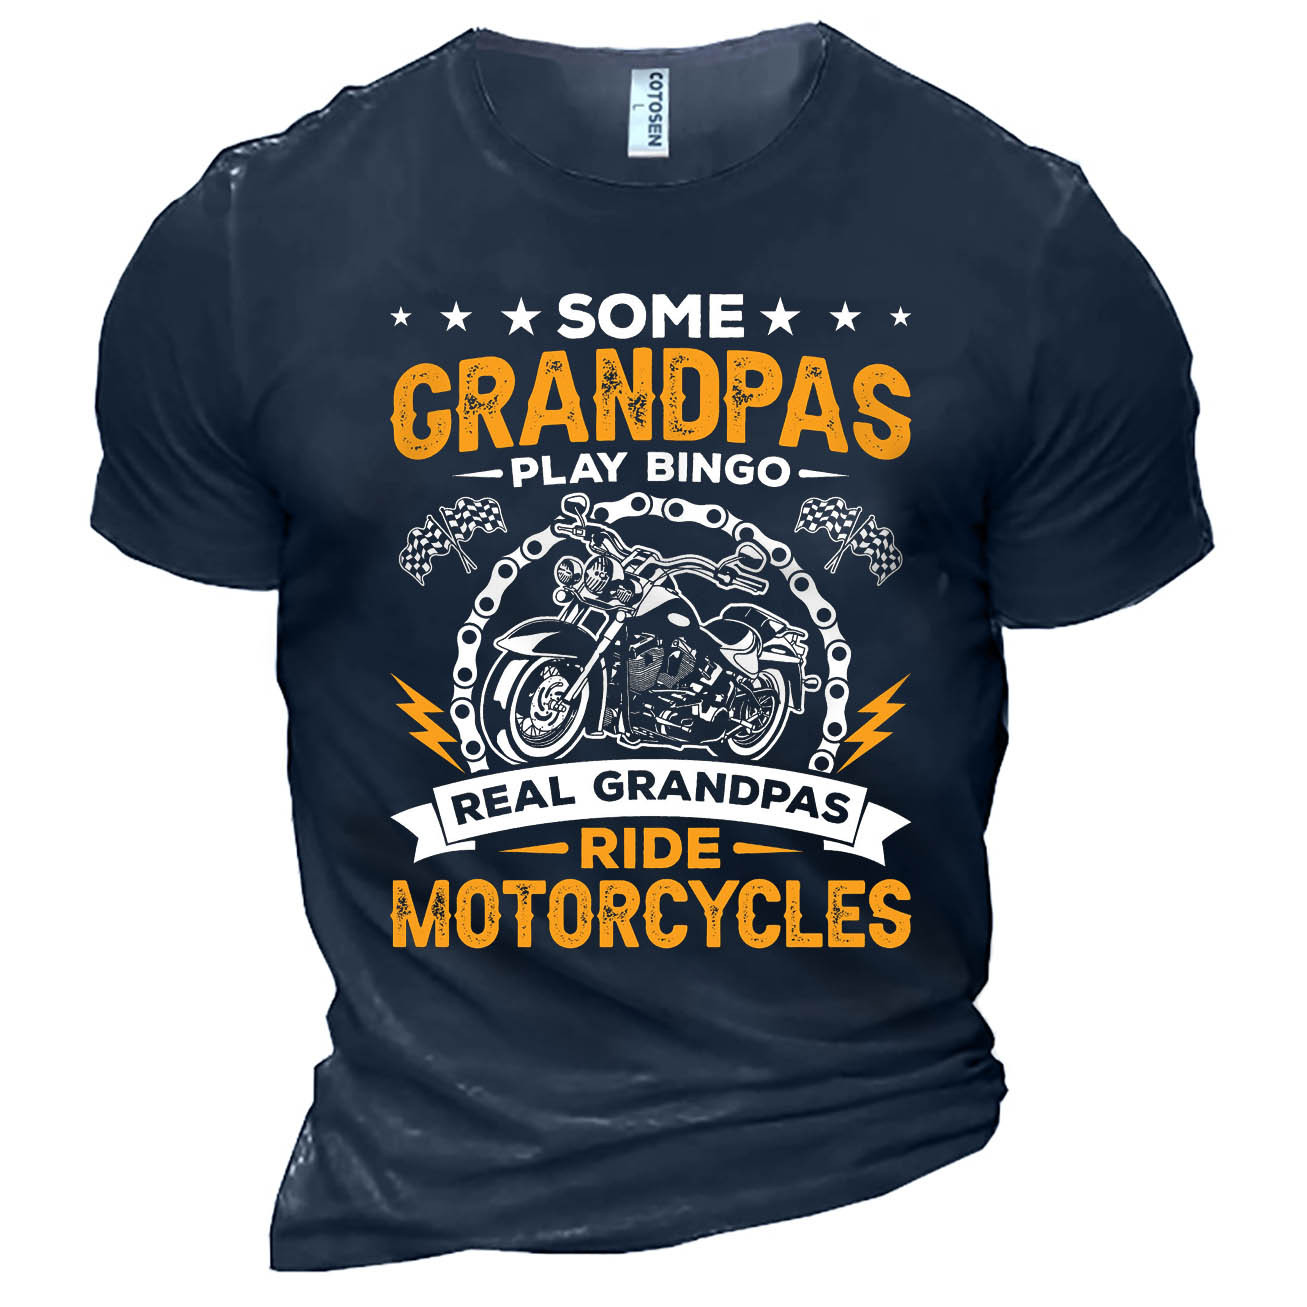 Men's Some Grandpas Play Chic Ride Motorcycle Cotton T-shirt